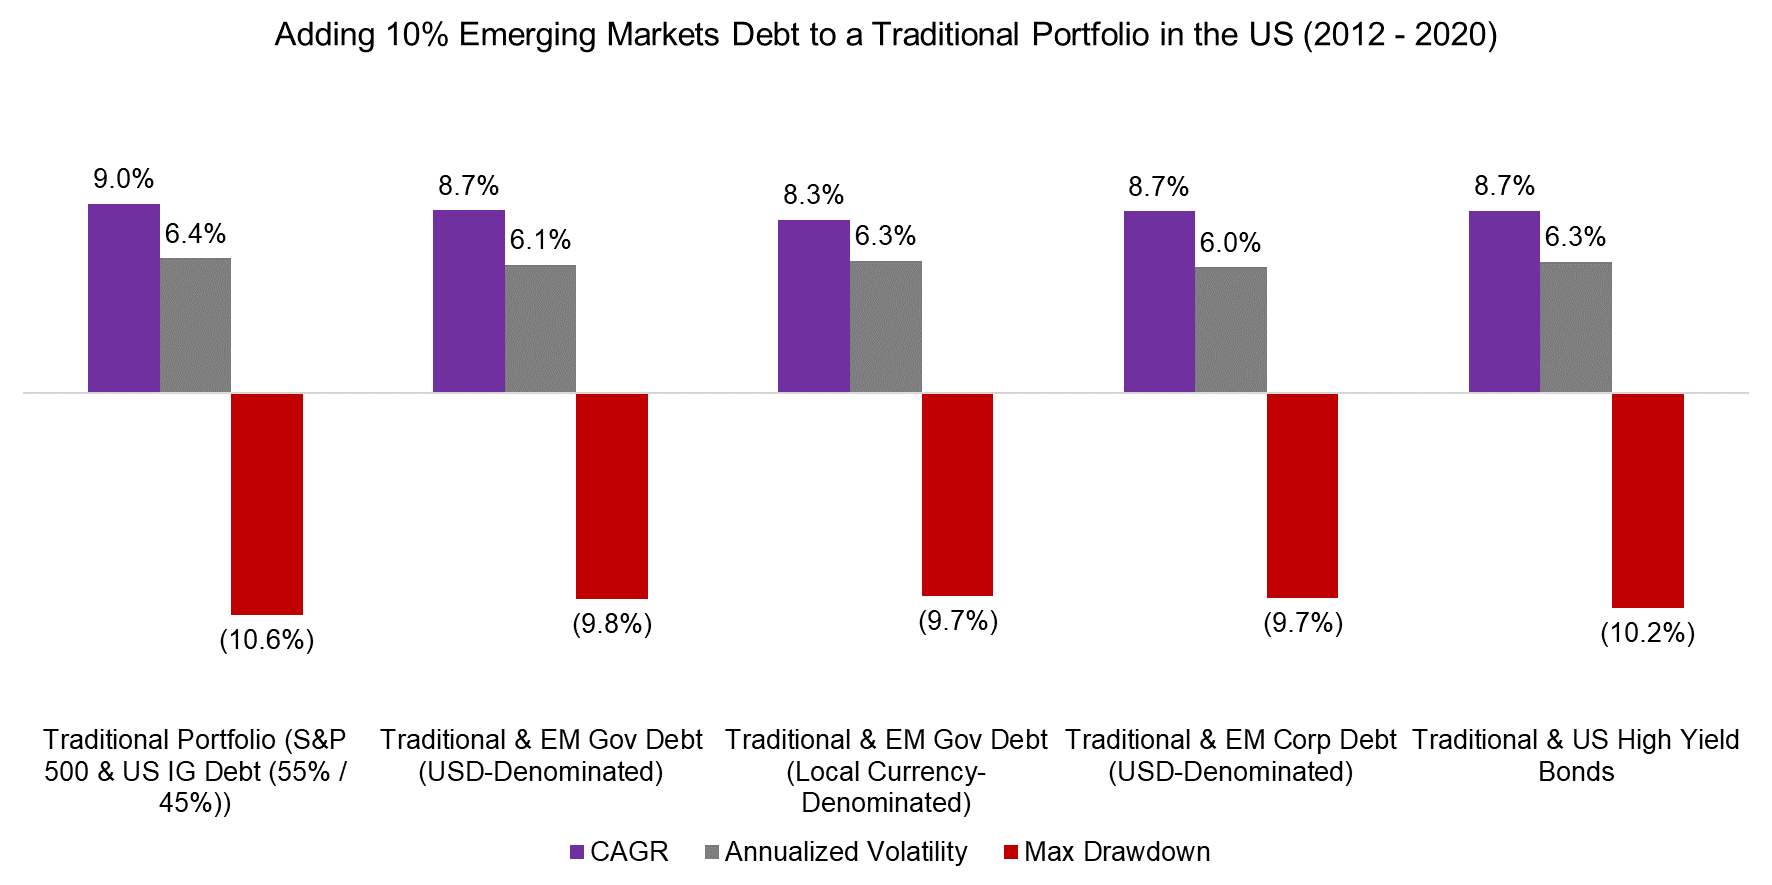 Adding 10% Emerging Markets Debt to a Traditional Portfolio in the US (2012 - 2020)